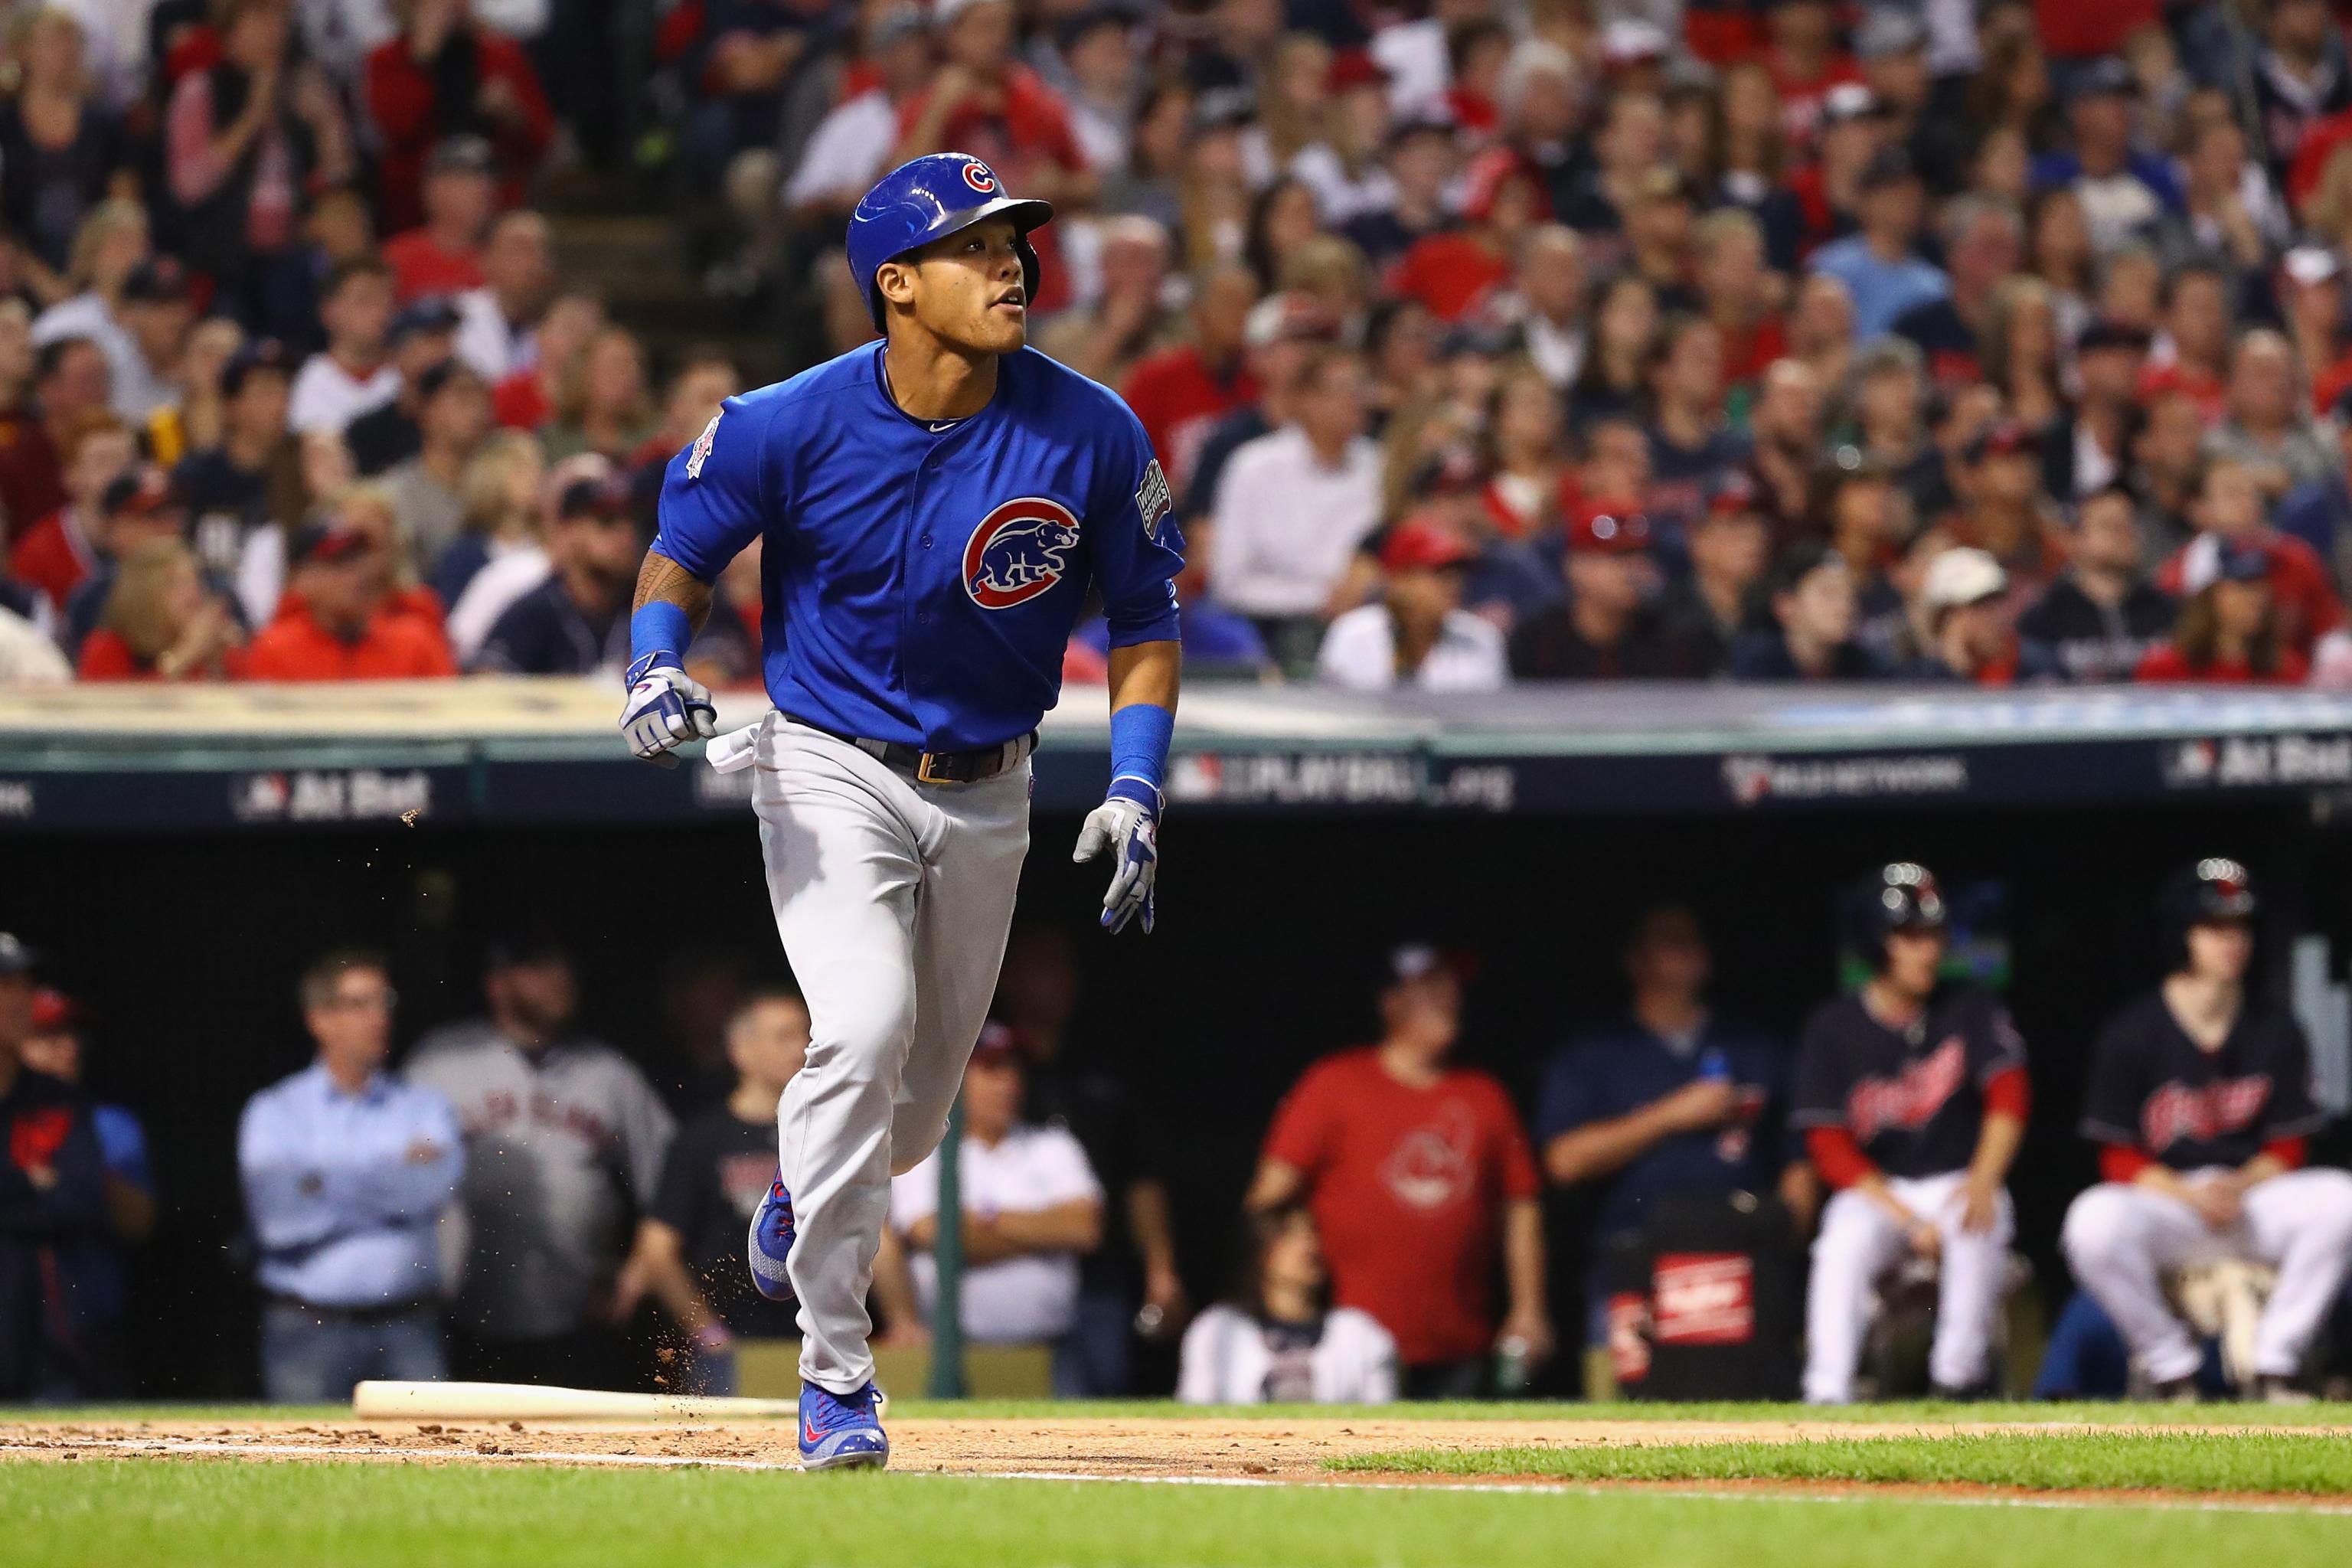 ADDISON RUSSELL CAREER HIGHLIGHTS 